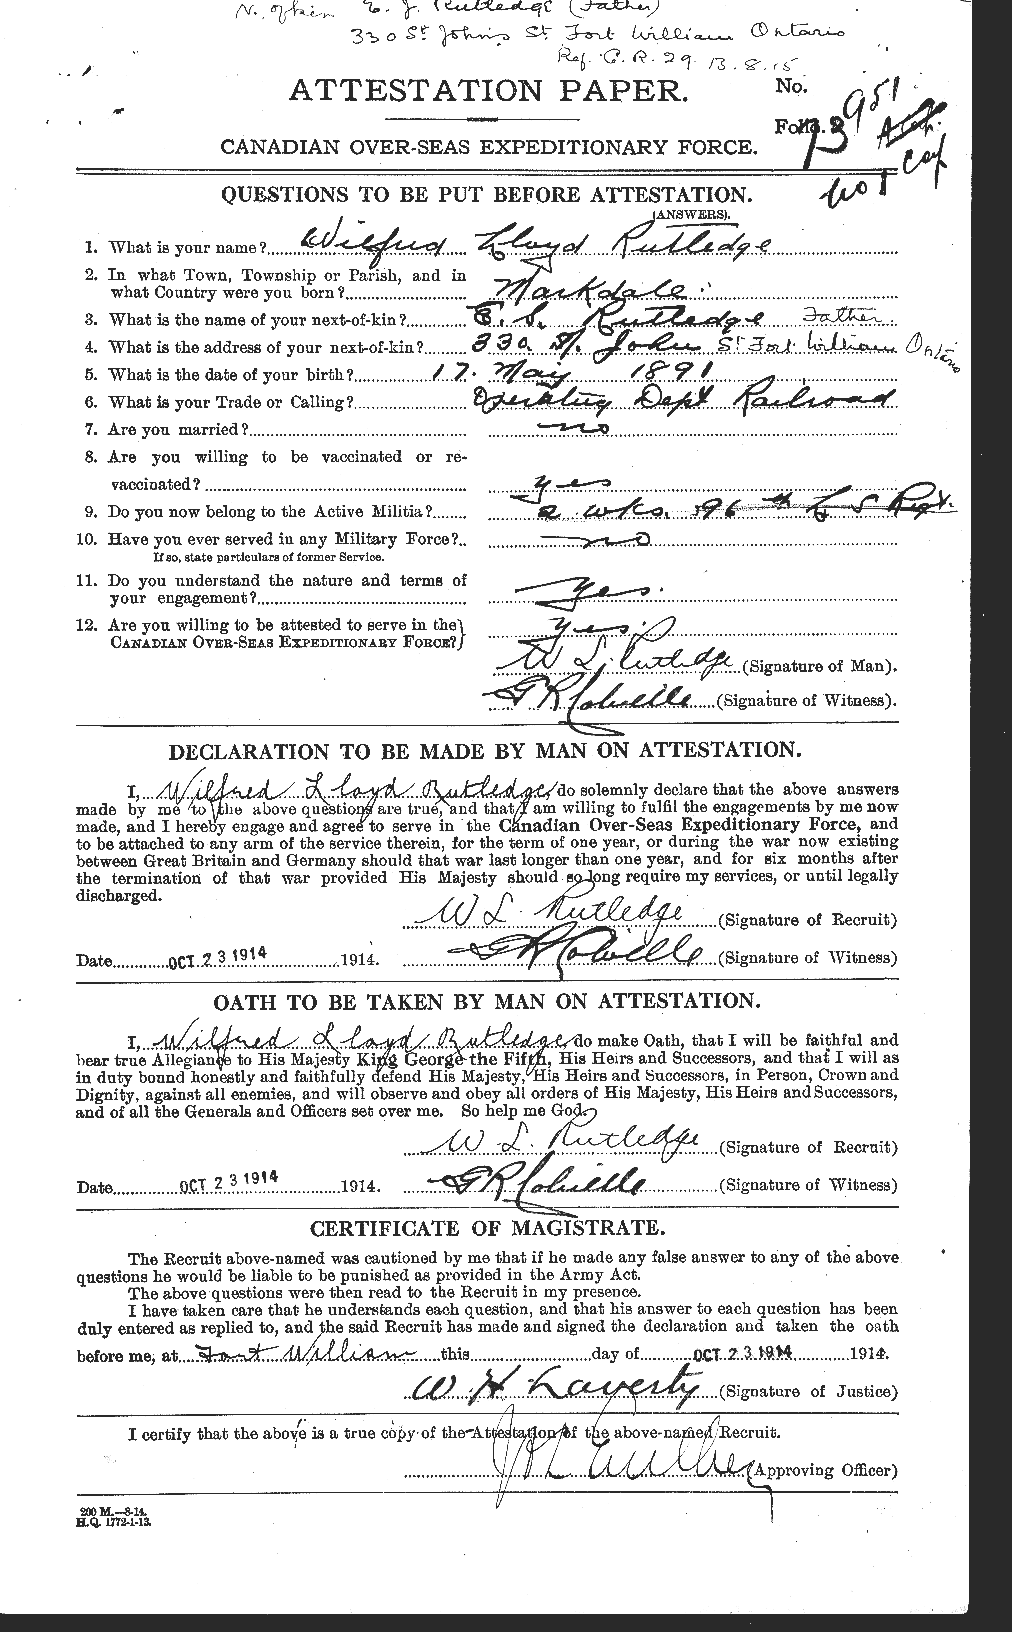 Personnel Records of the First World War - CEF 620818a